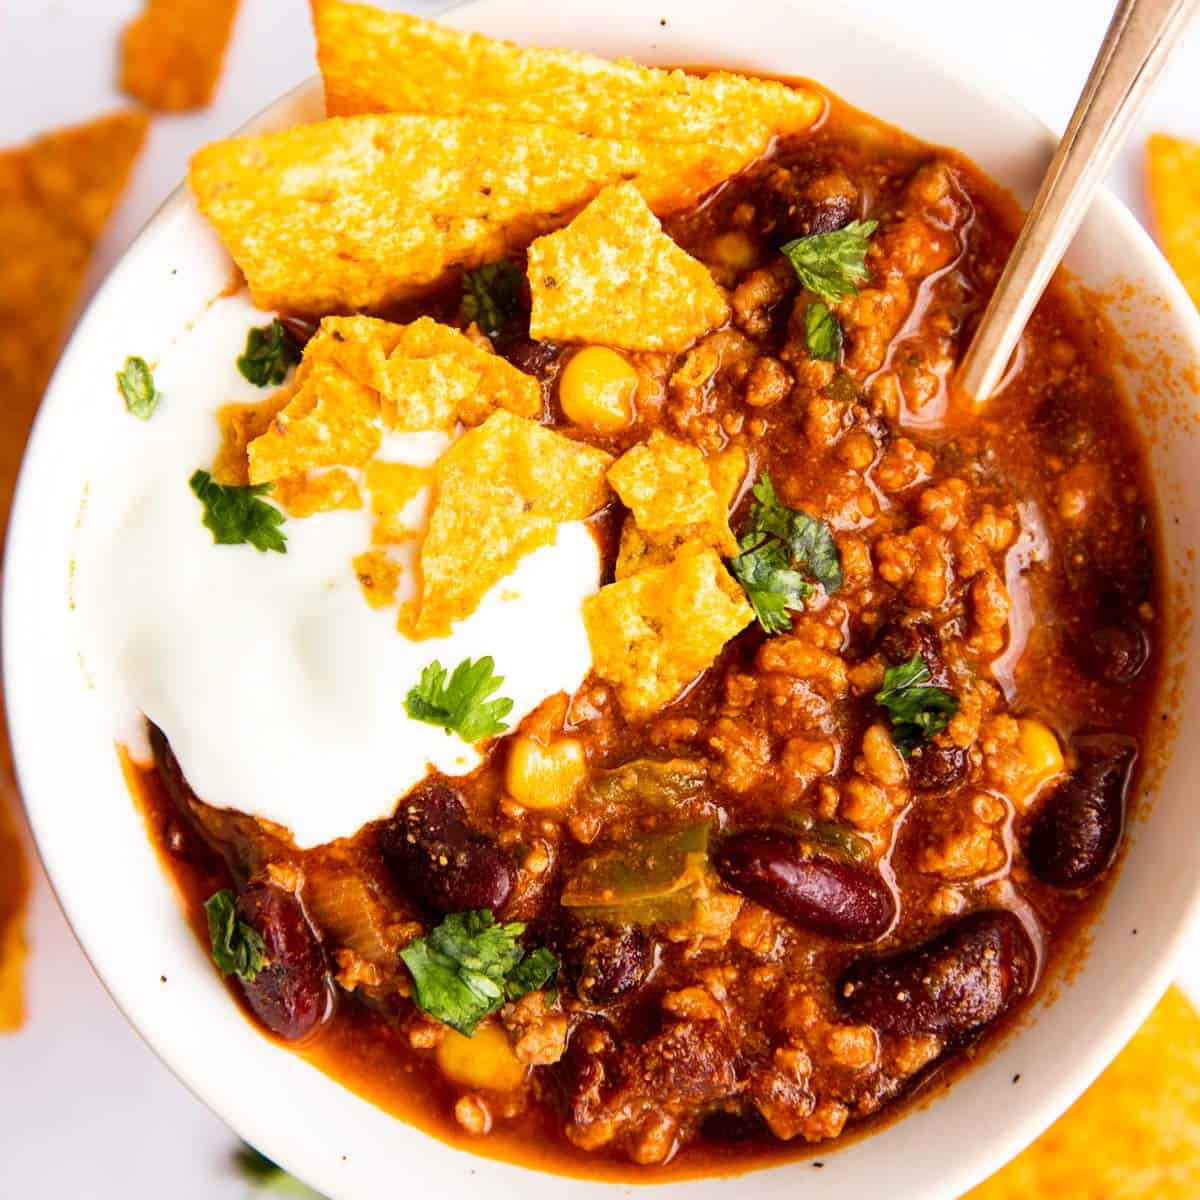 https://www.savorynothings.com/wp-content/uploads/2020/02/instant-pot-chili-image-sq.jpg